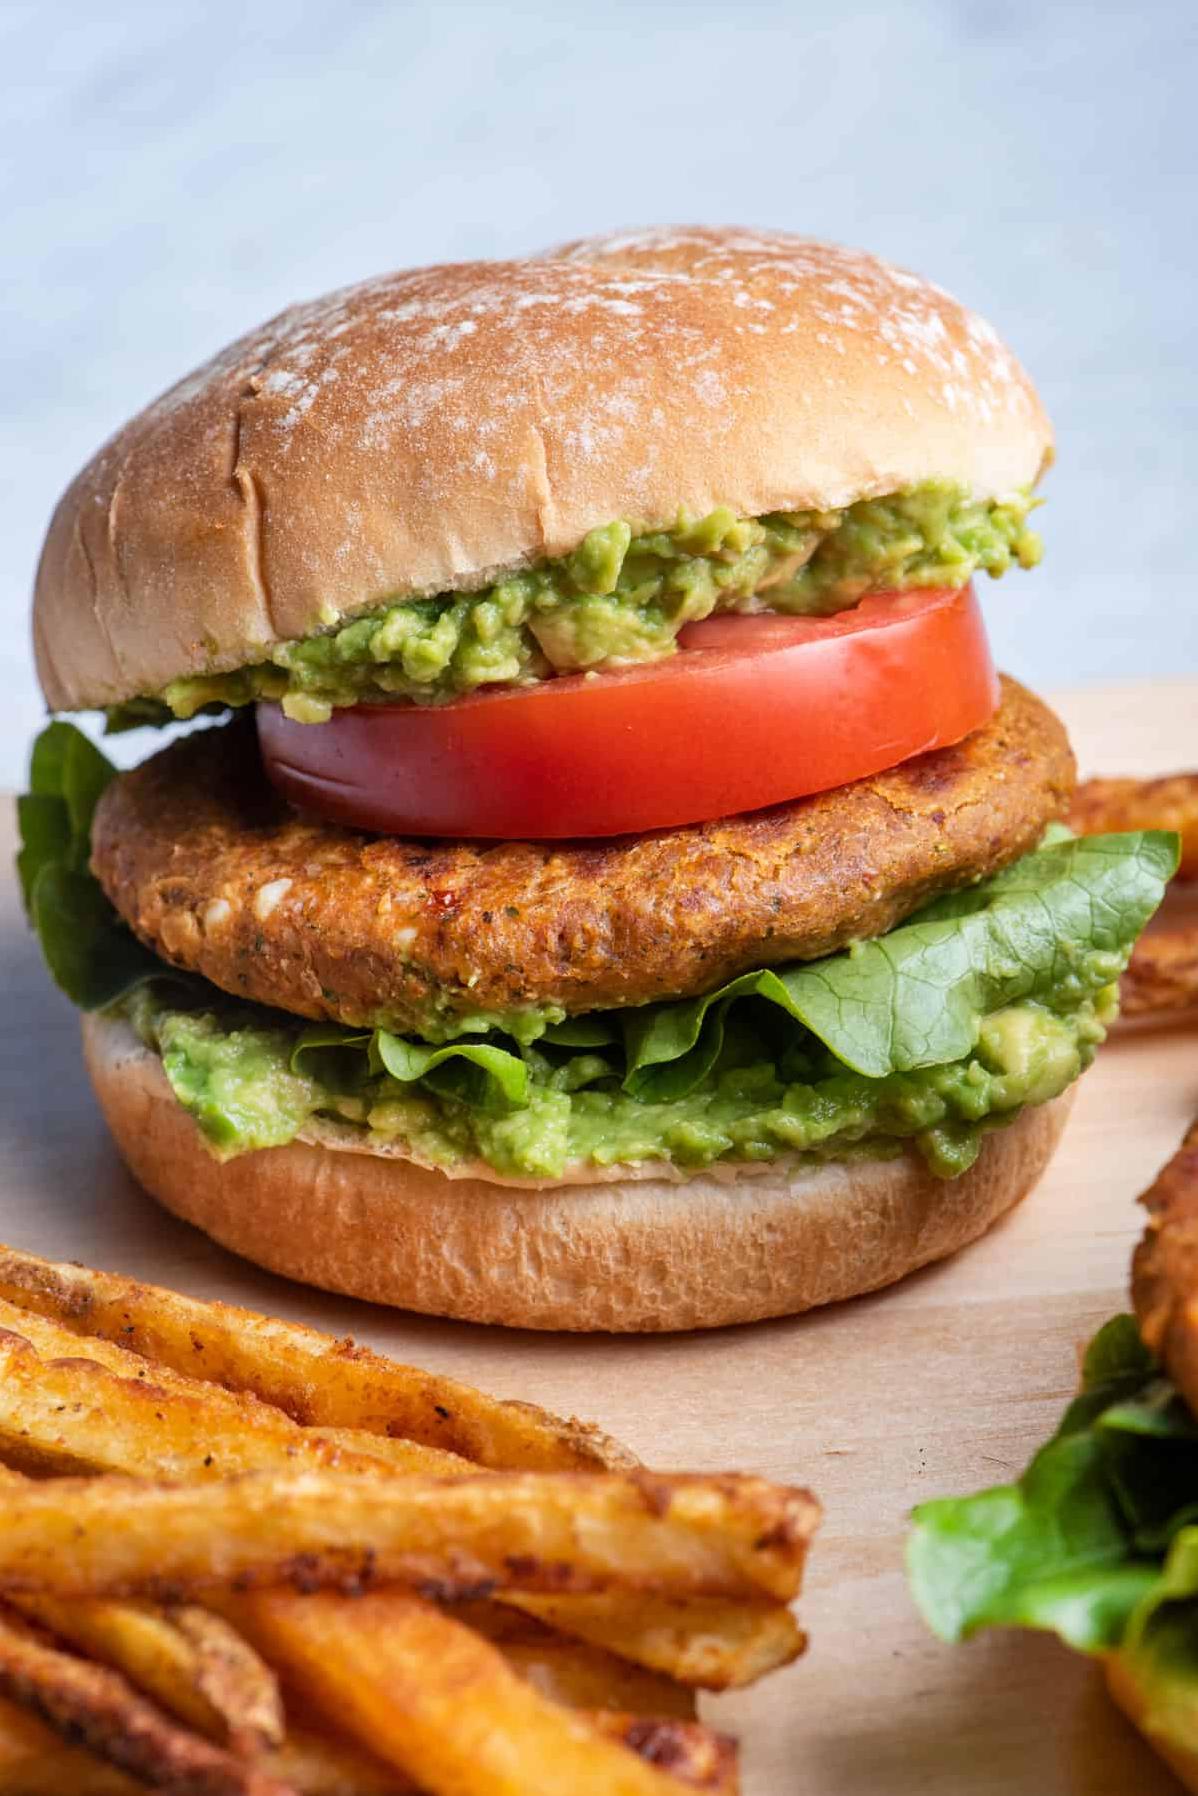  These burgers make for an easy and tasty vegan meal.